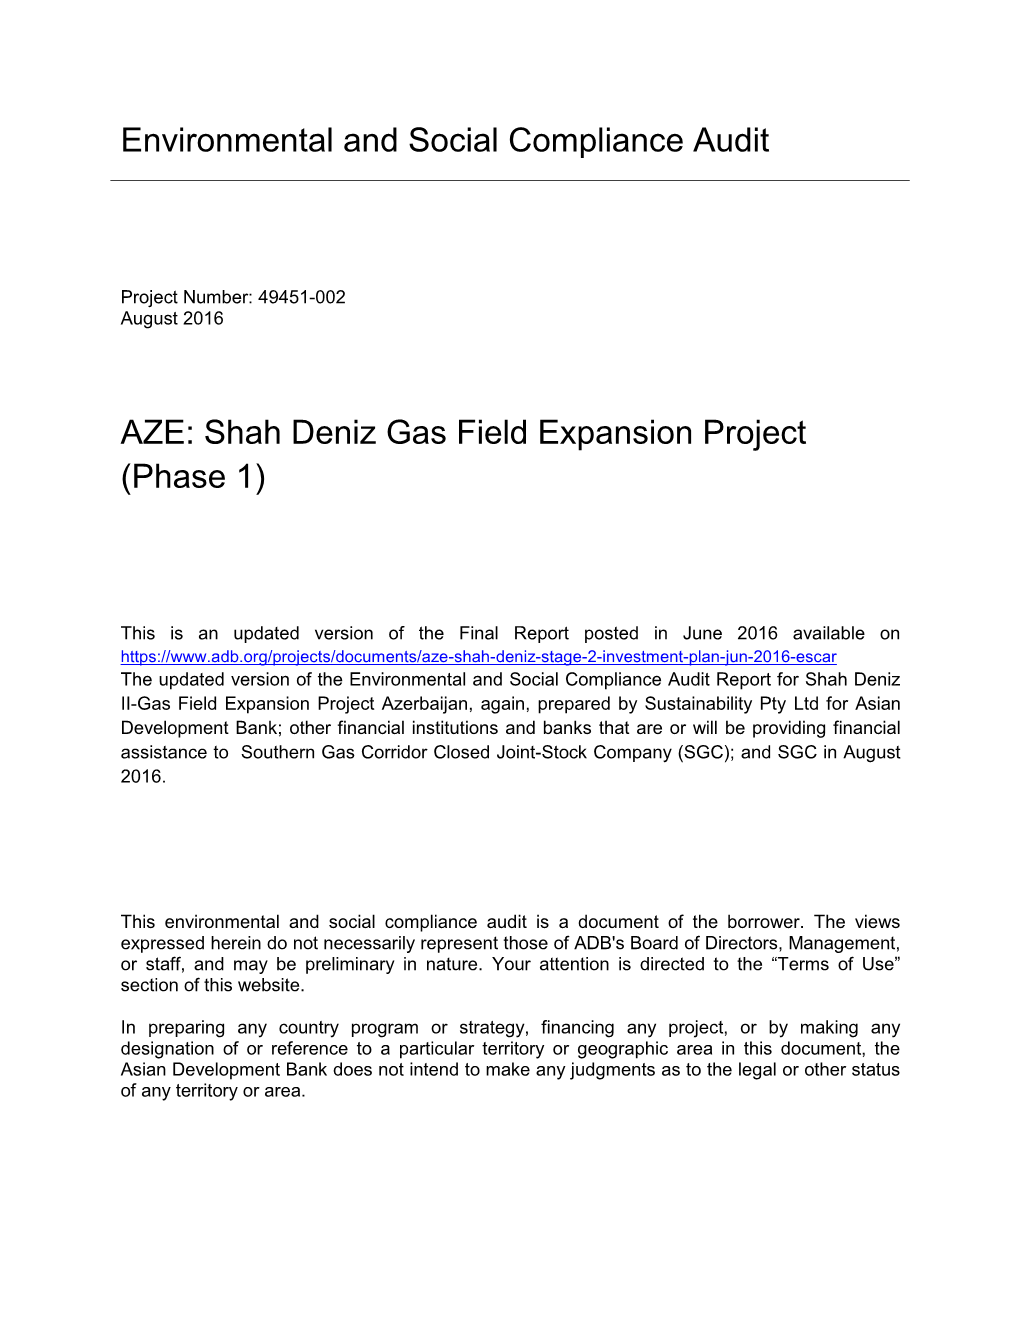 Shah Deniz Gas Field Expansion Project (Phase 1)